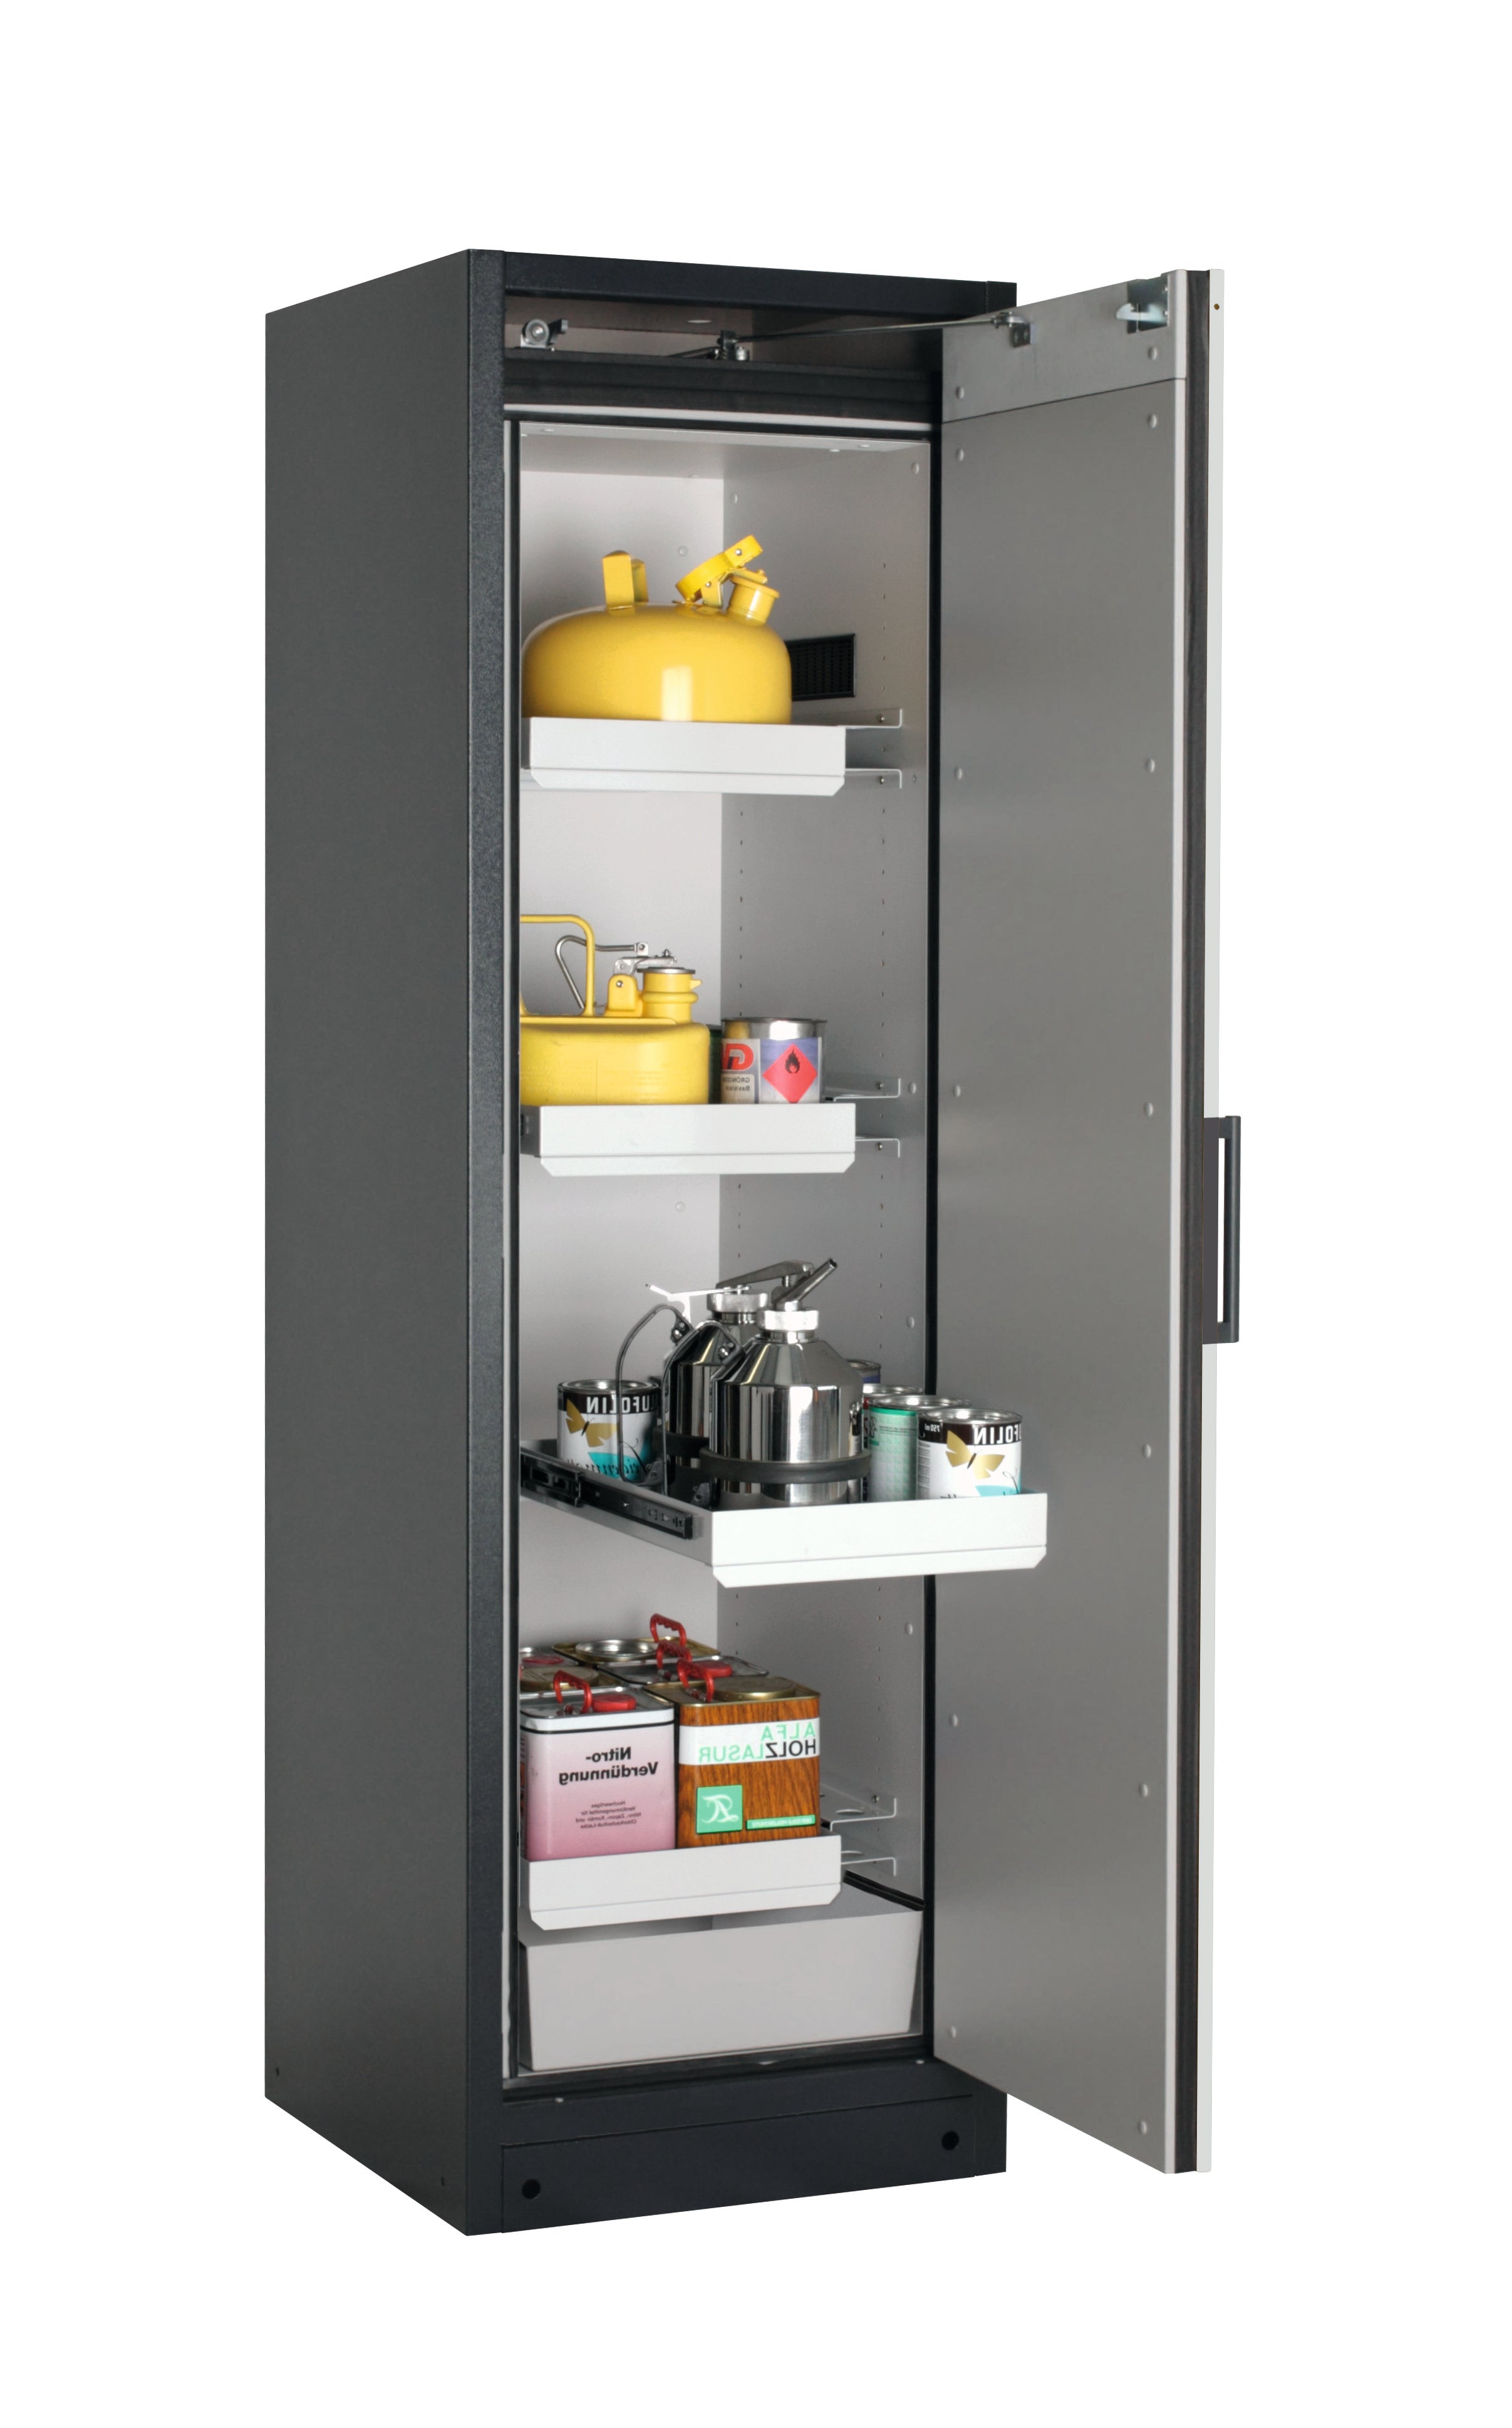 Type 90 safety storage cabinet Q-CLASSIC-90 model Q90.195.060.R in light grey RAL 7035 with 3x drawer (standard) (sheet steel),